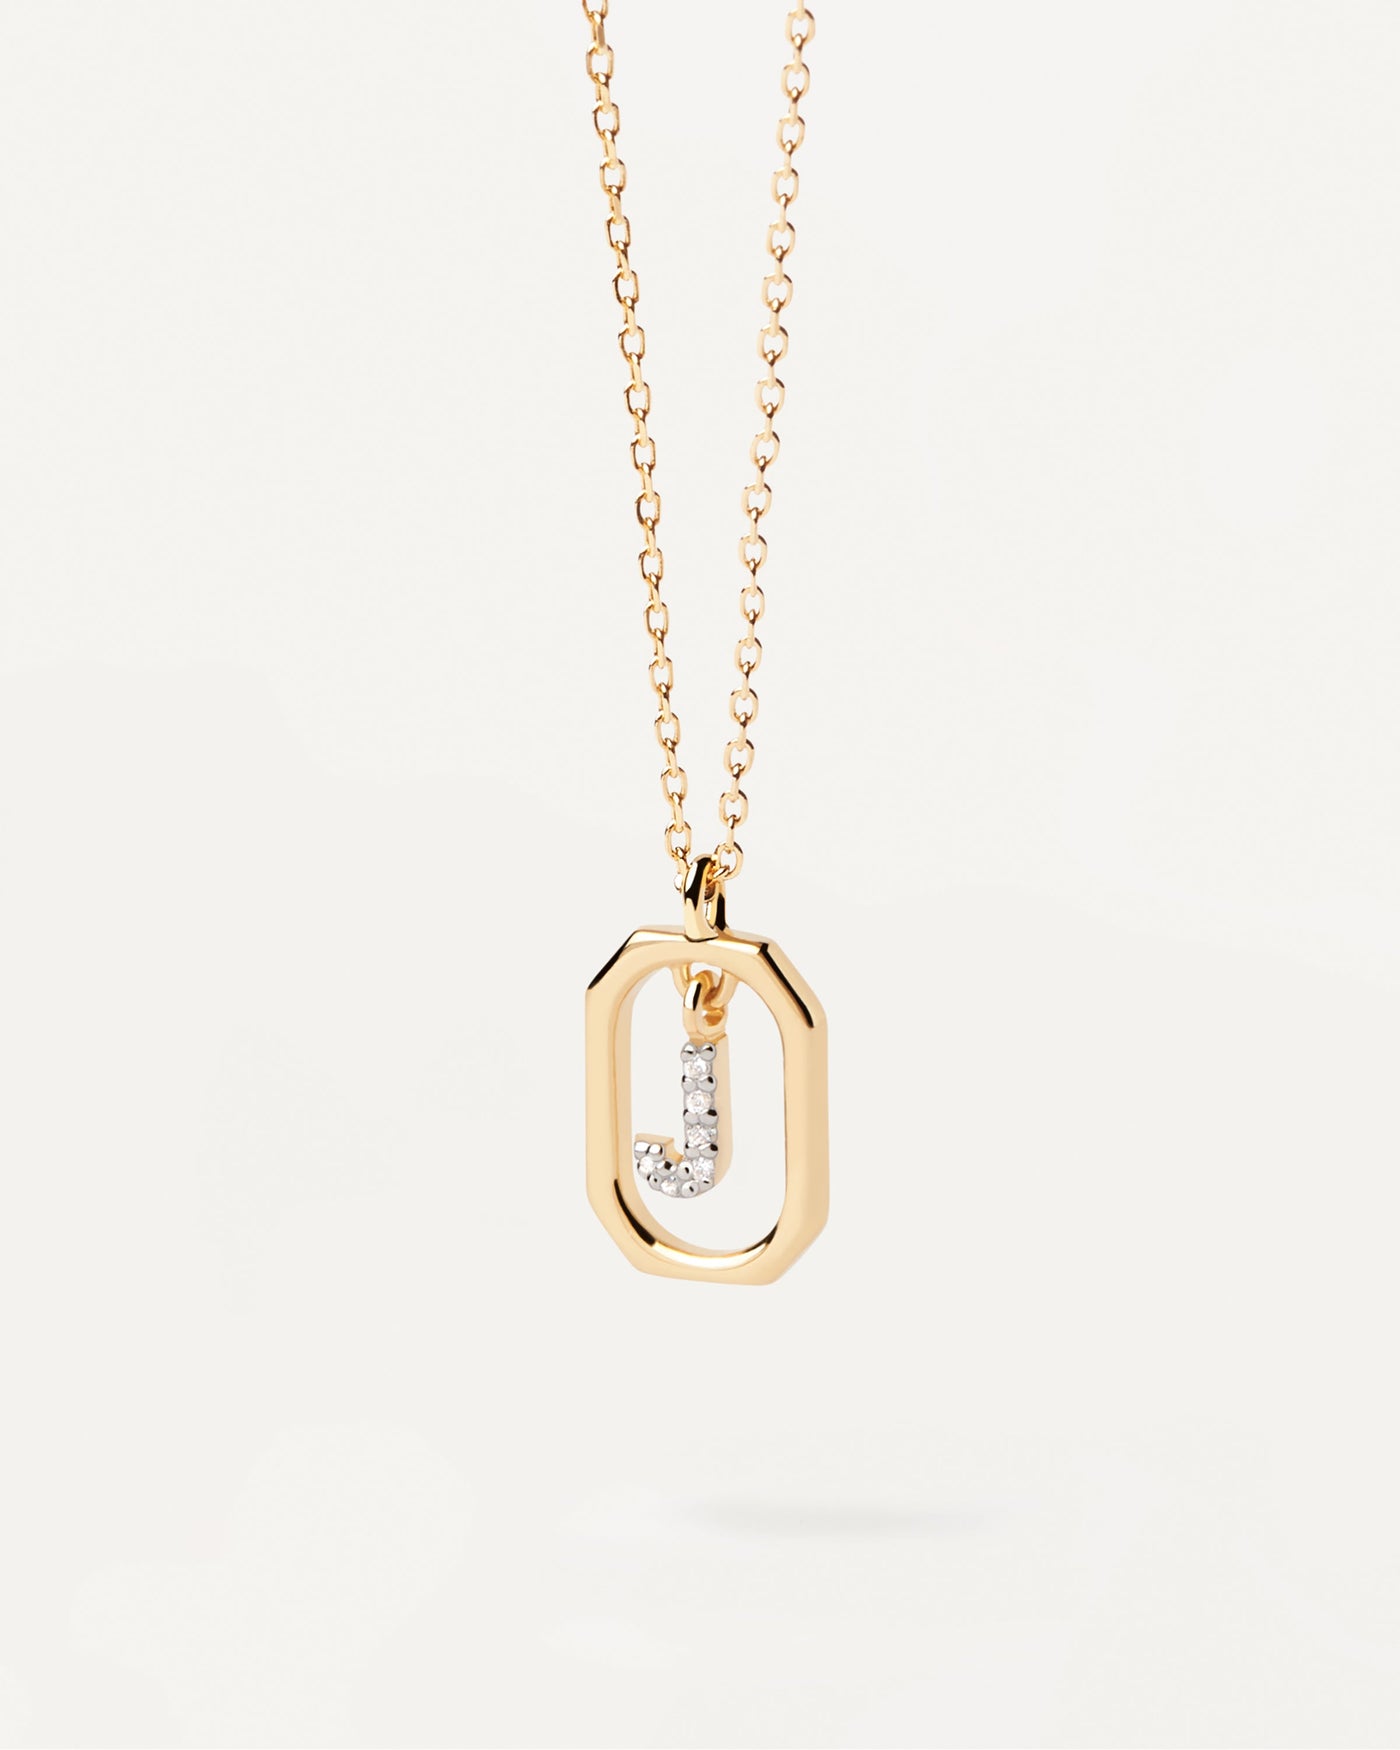 2023 Selection | Mini Letter J Necklace. Small initial J necklace in zirconia inside gold-plated silver octagonal pendant. Get the latest arrival from PDPAOLA. Place your order safely and get this Best Seller. Free Shipping.